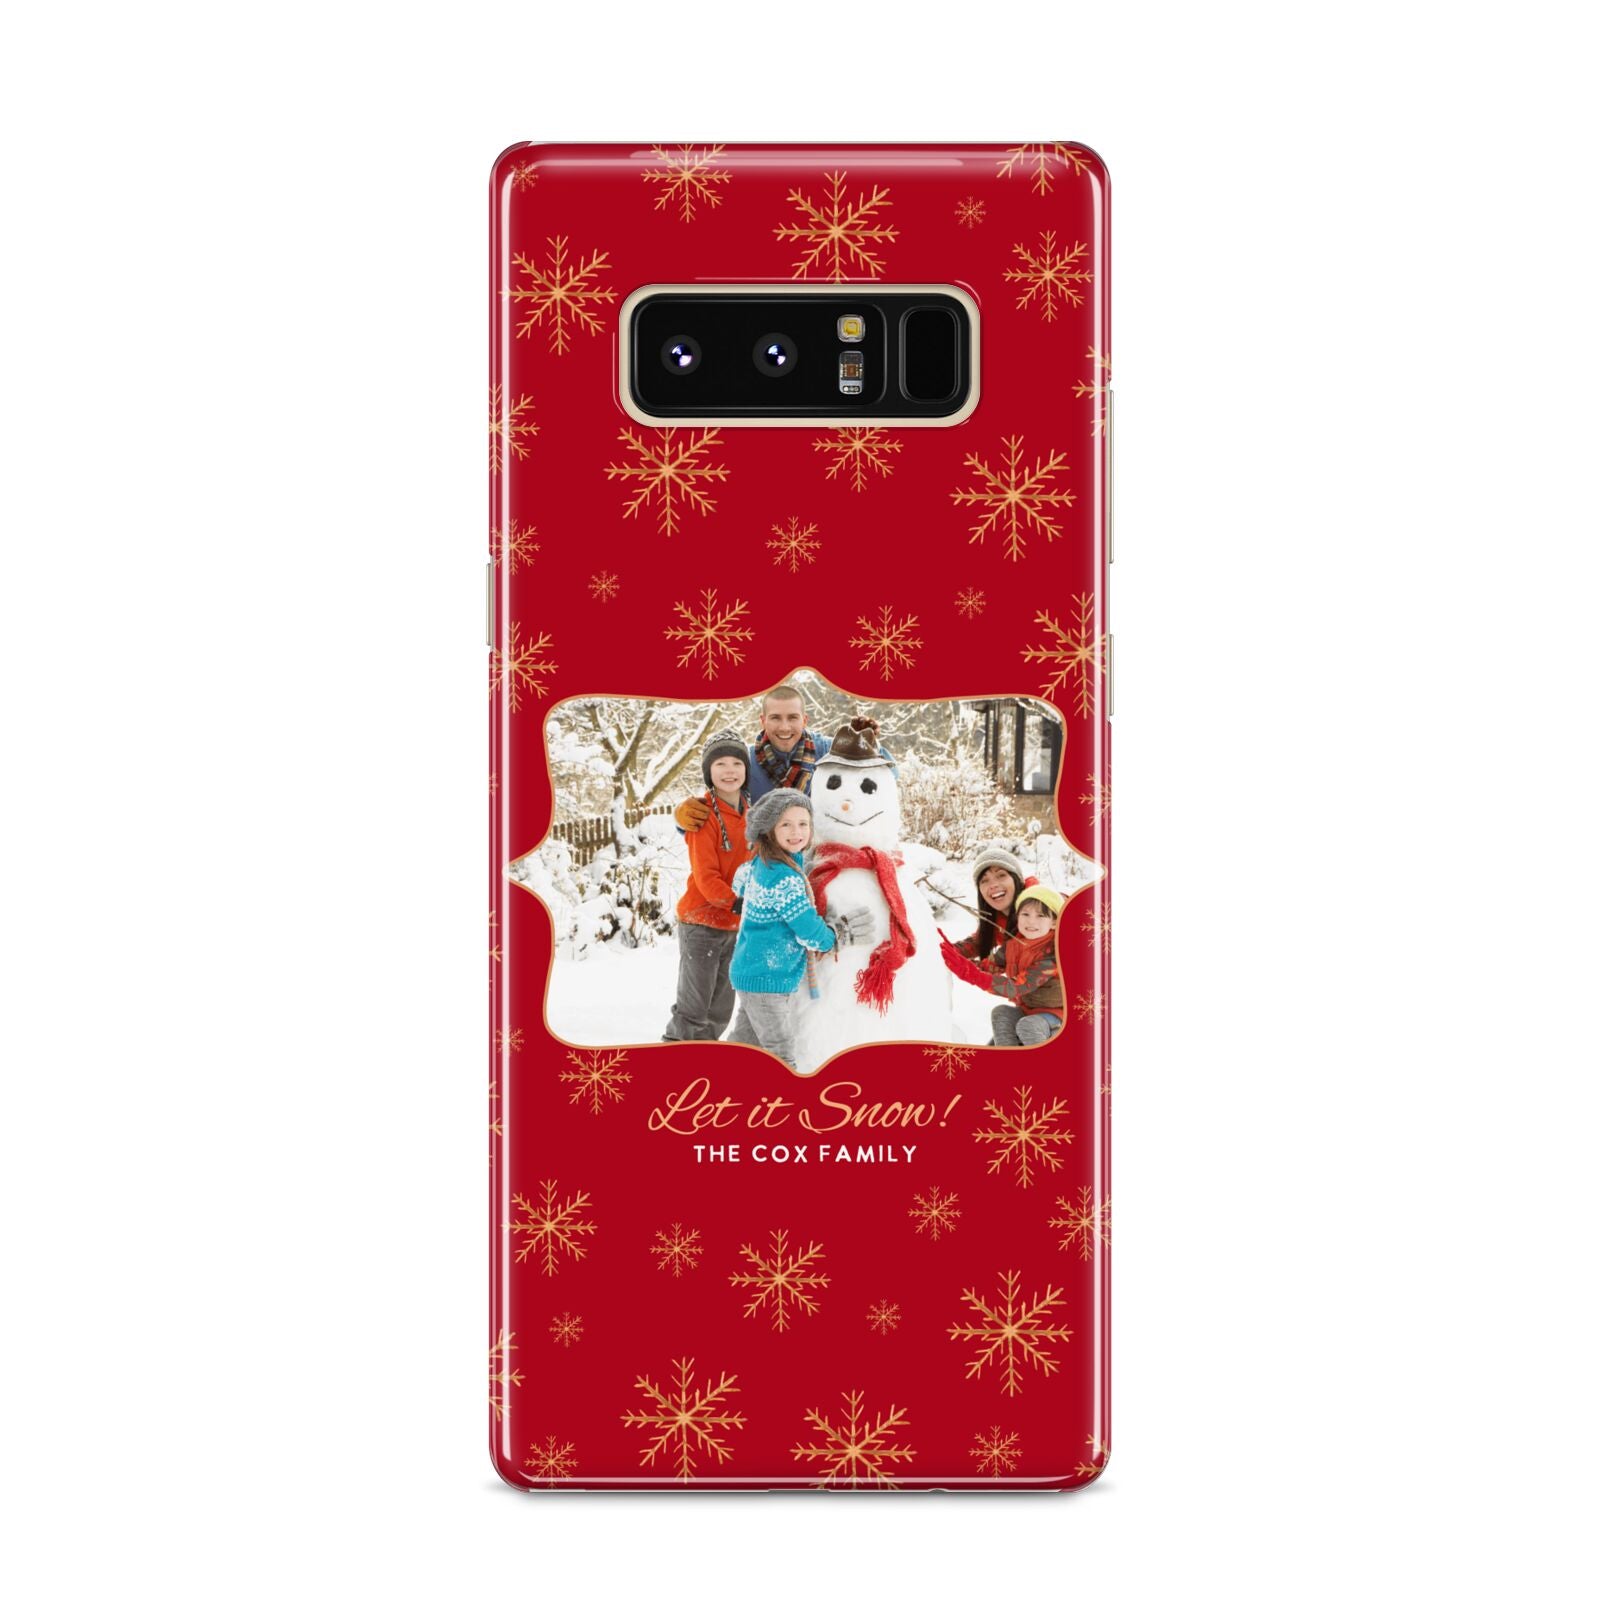 Let it Snow Christmas Photo Upload Samsung Galaxy S8 Case